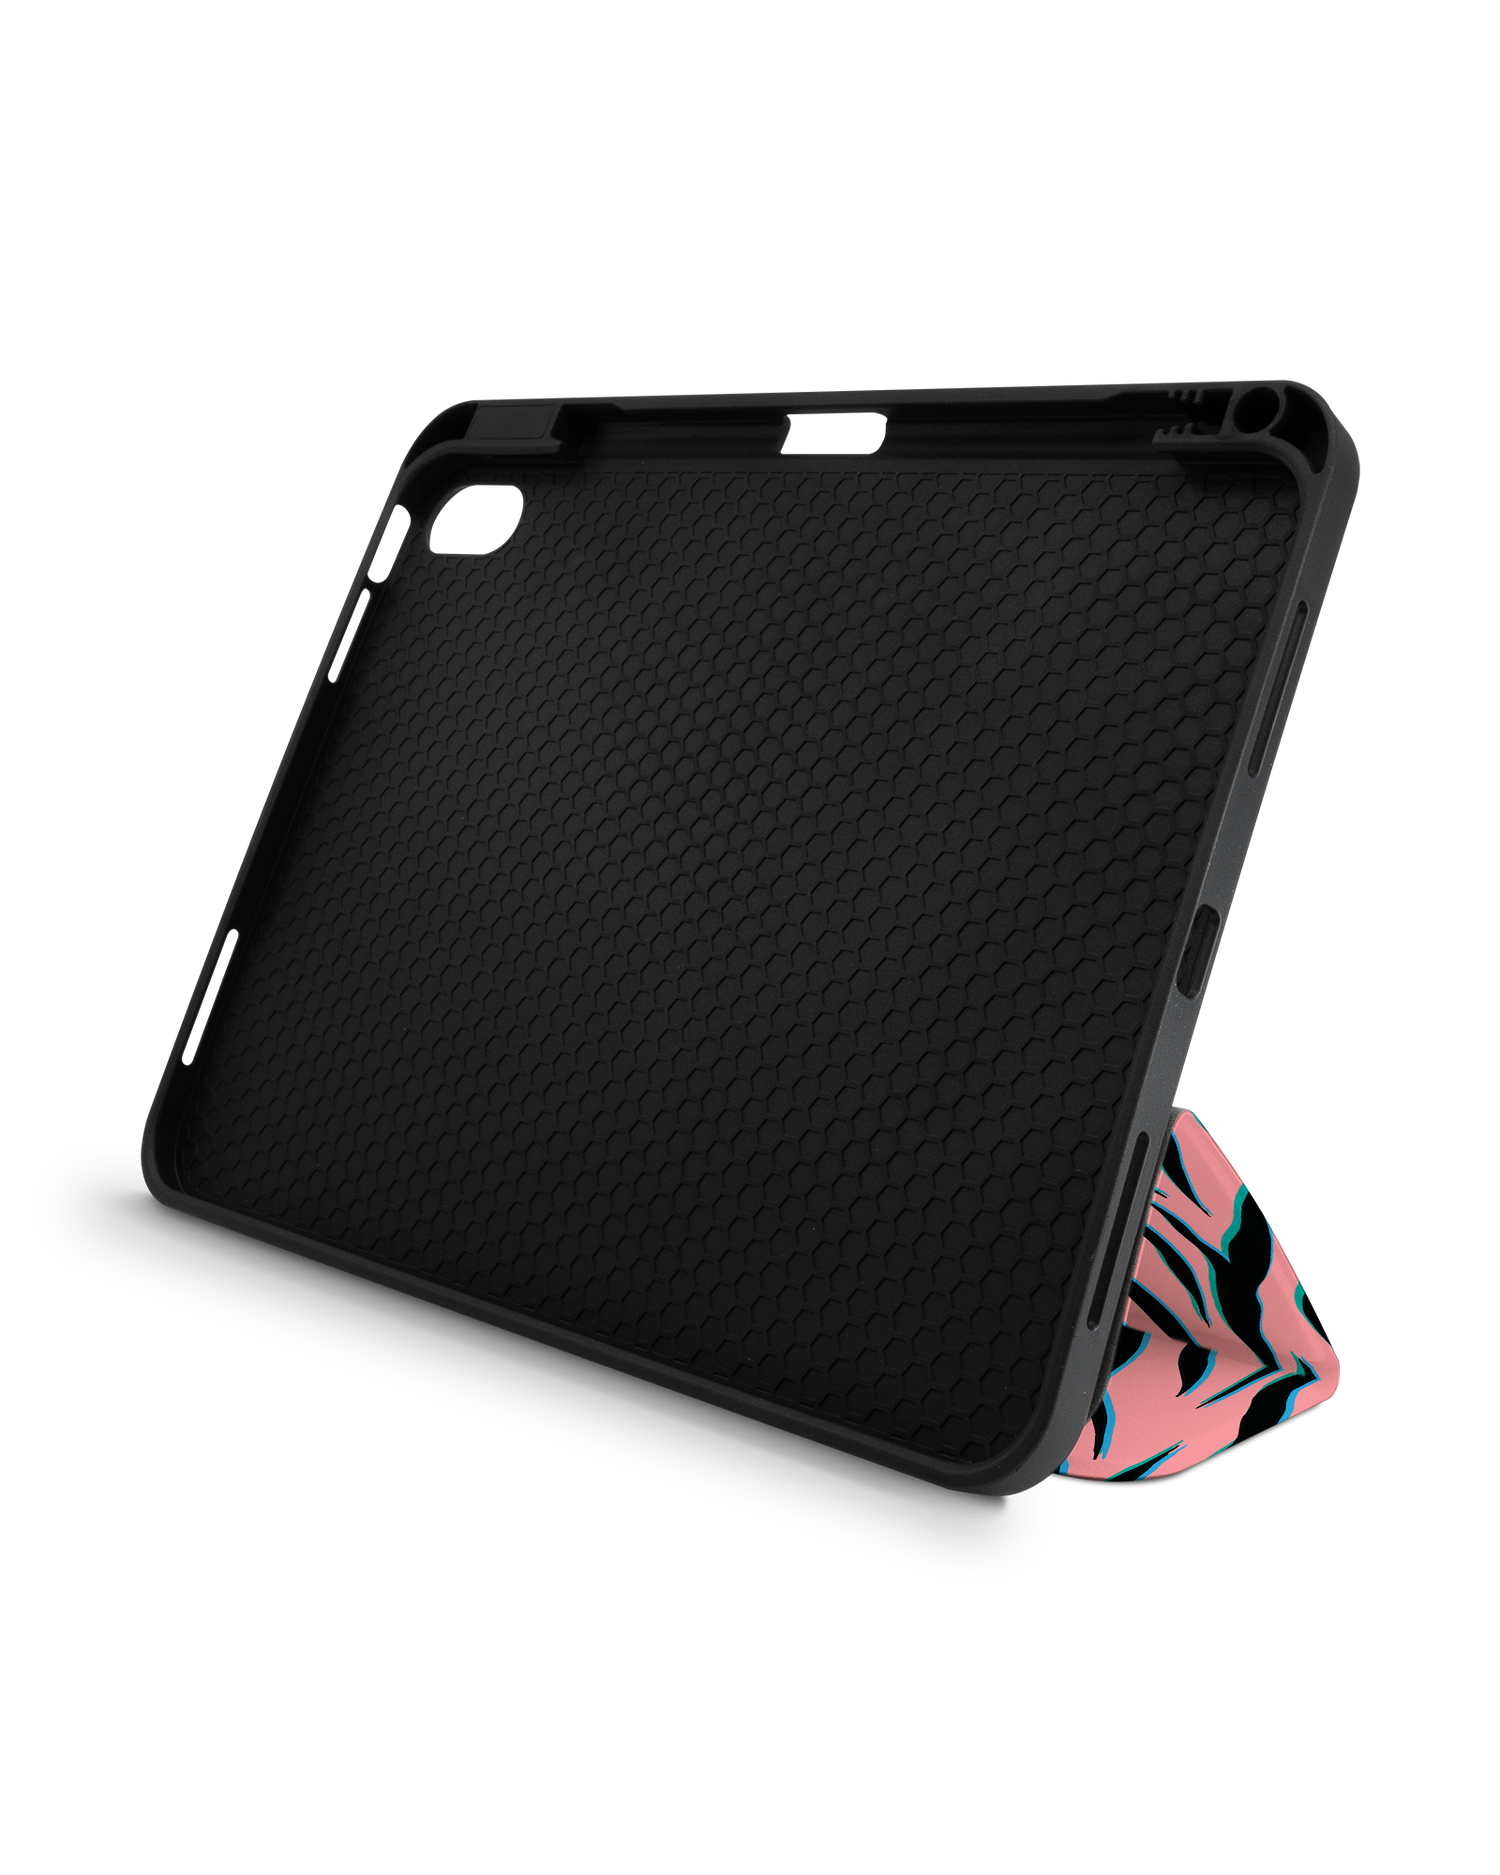 Pink Zebra iPad Case with Pencil Holder for Apple iPad (10th Generation): Set up in landscape format (front view)